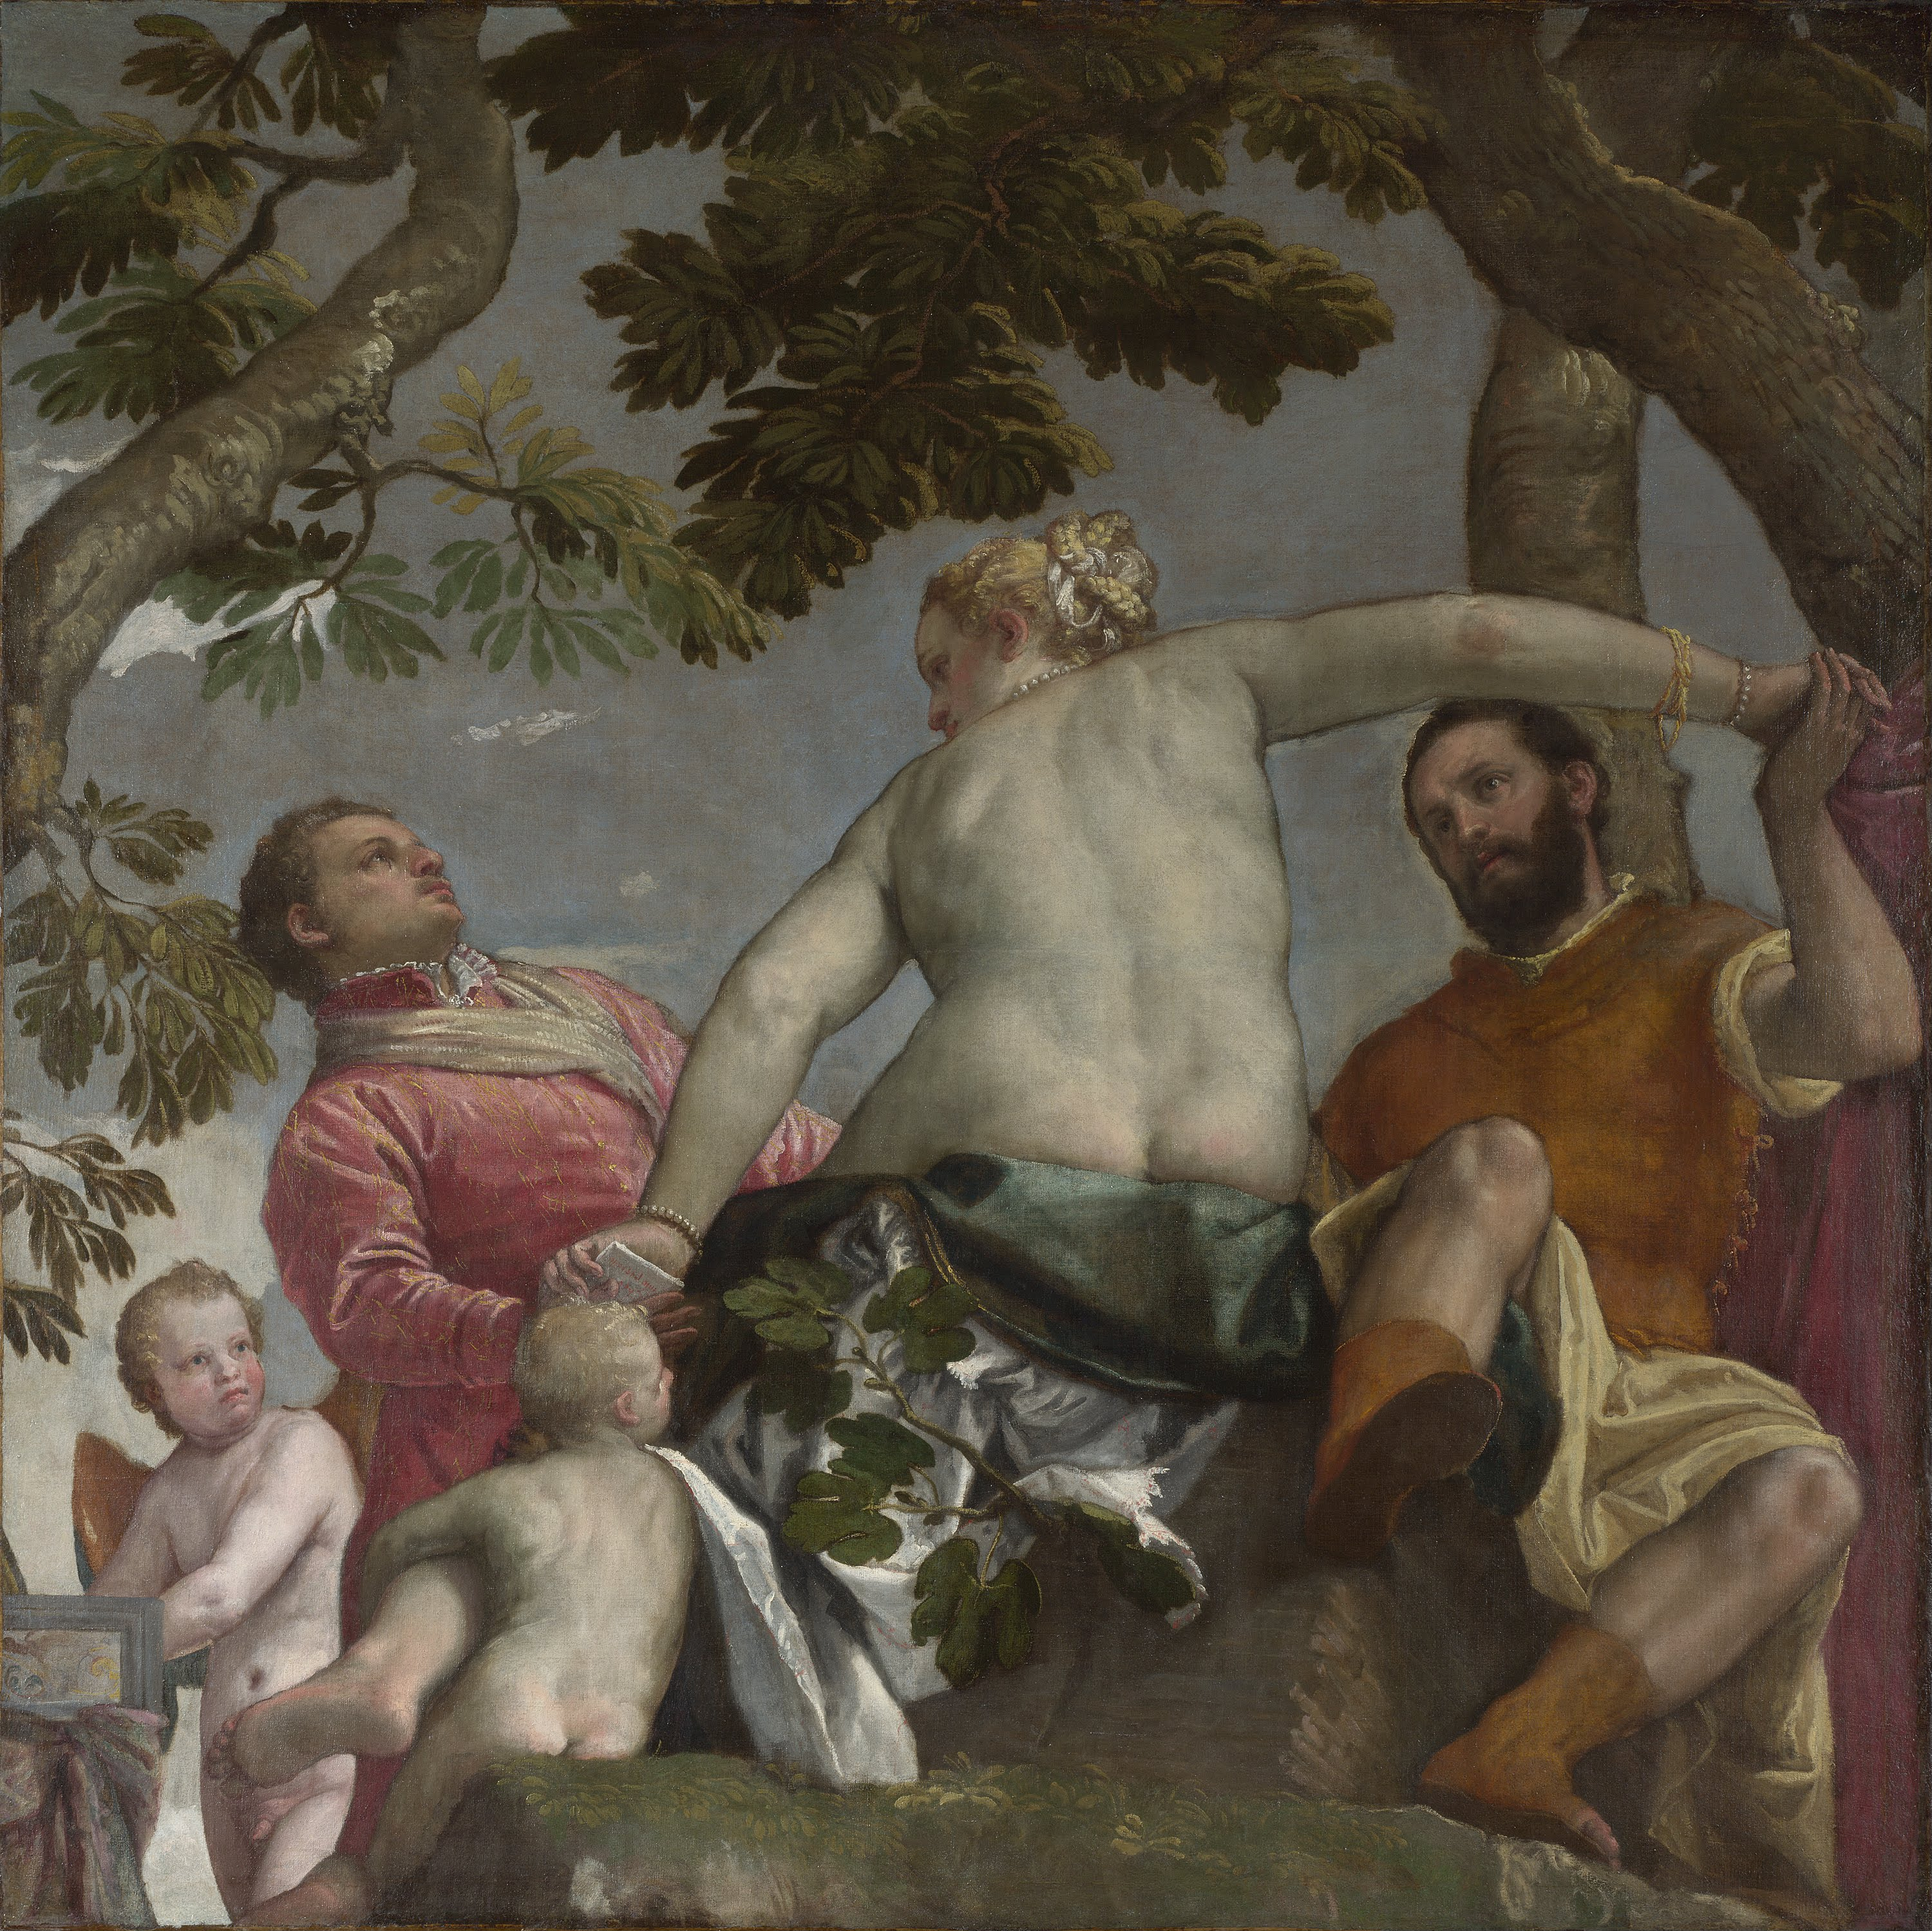 Ontrouw by Paolo Veronese - 1575 - 189,9 x 189,9 cm 